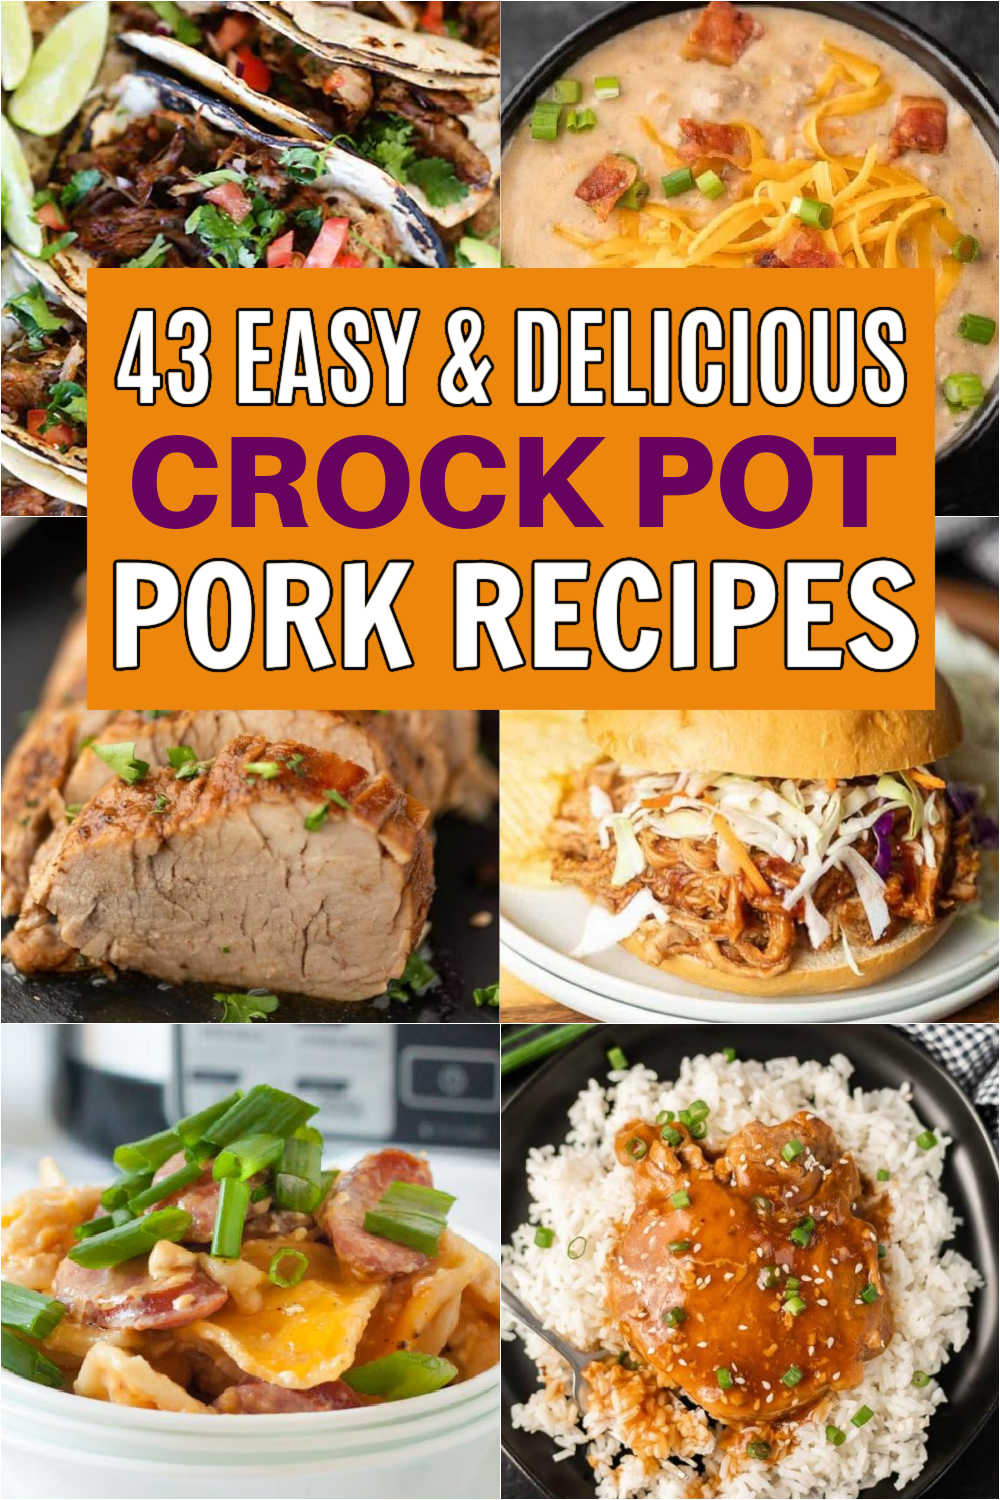 We have gathered 43 of our Best Crock Pot Pork Recipes. These pork recipes make dinner easy by making it in the slow cooker. These slow cooker pork recipes include low carb and healthy recipes too!  These crockpot recipes are perfect for dinner.  #eatingonadime #crockpotrecipes #slowcookerrecipes #porkrecipes 
